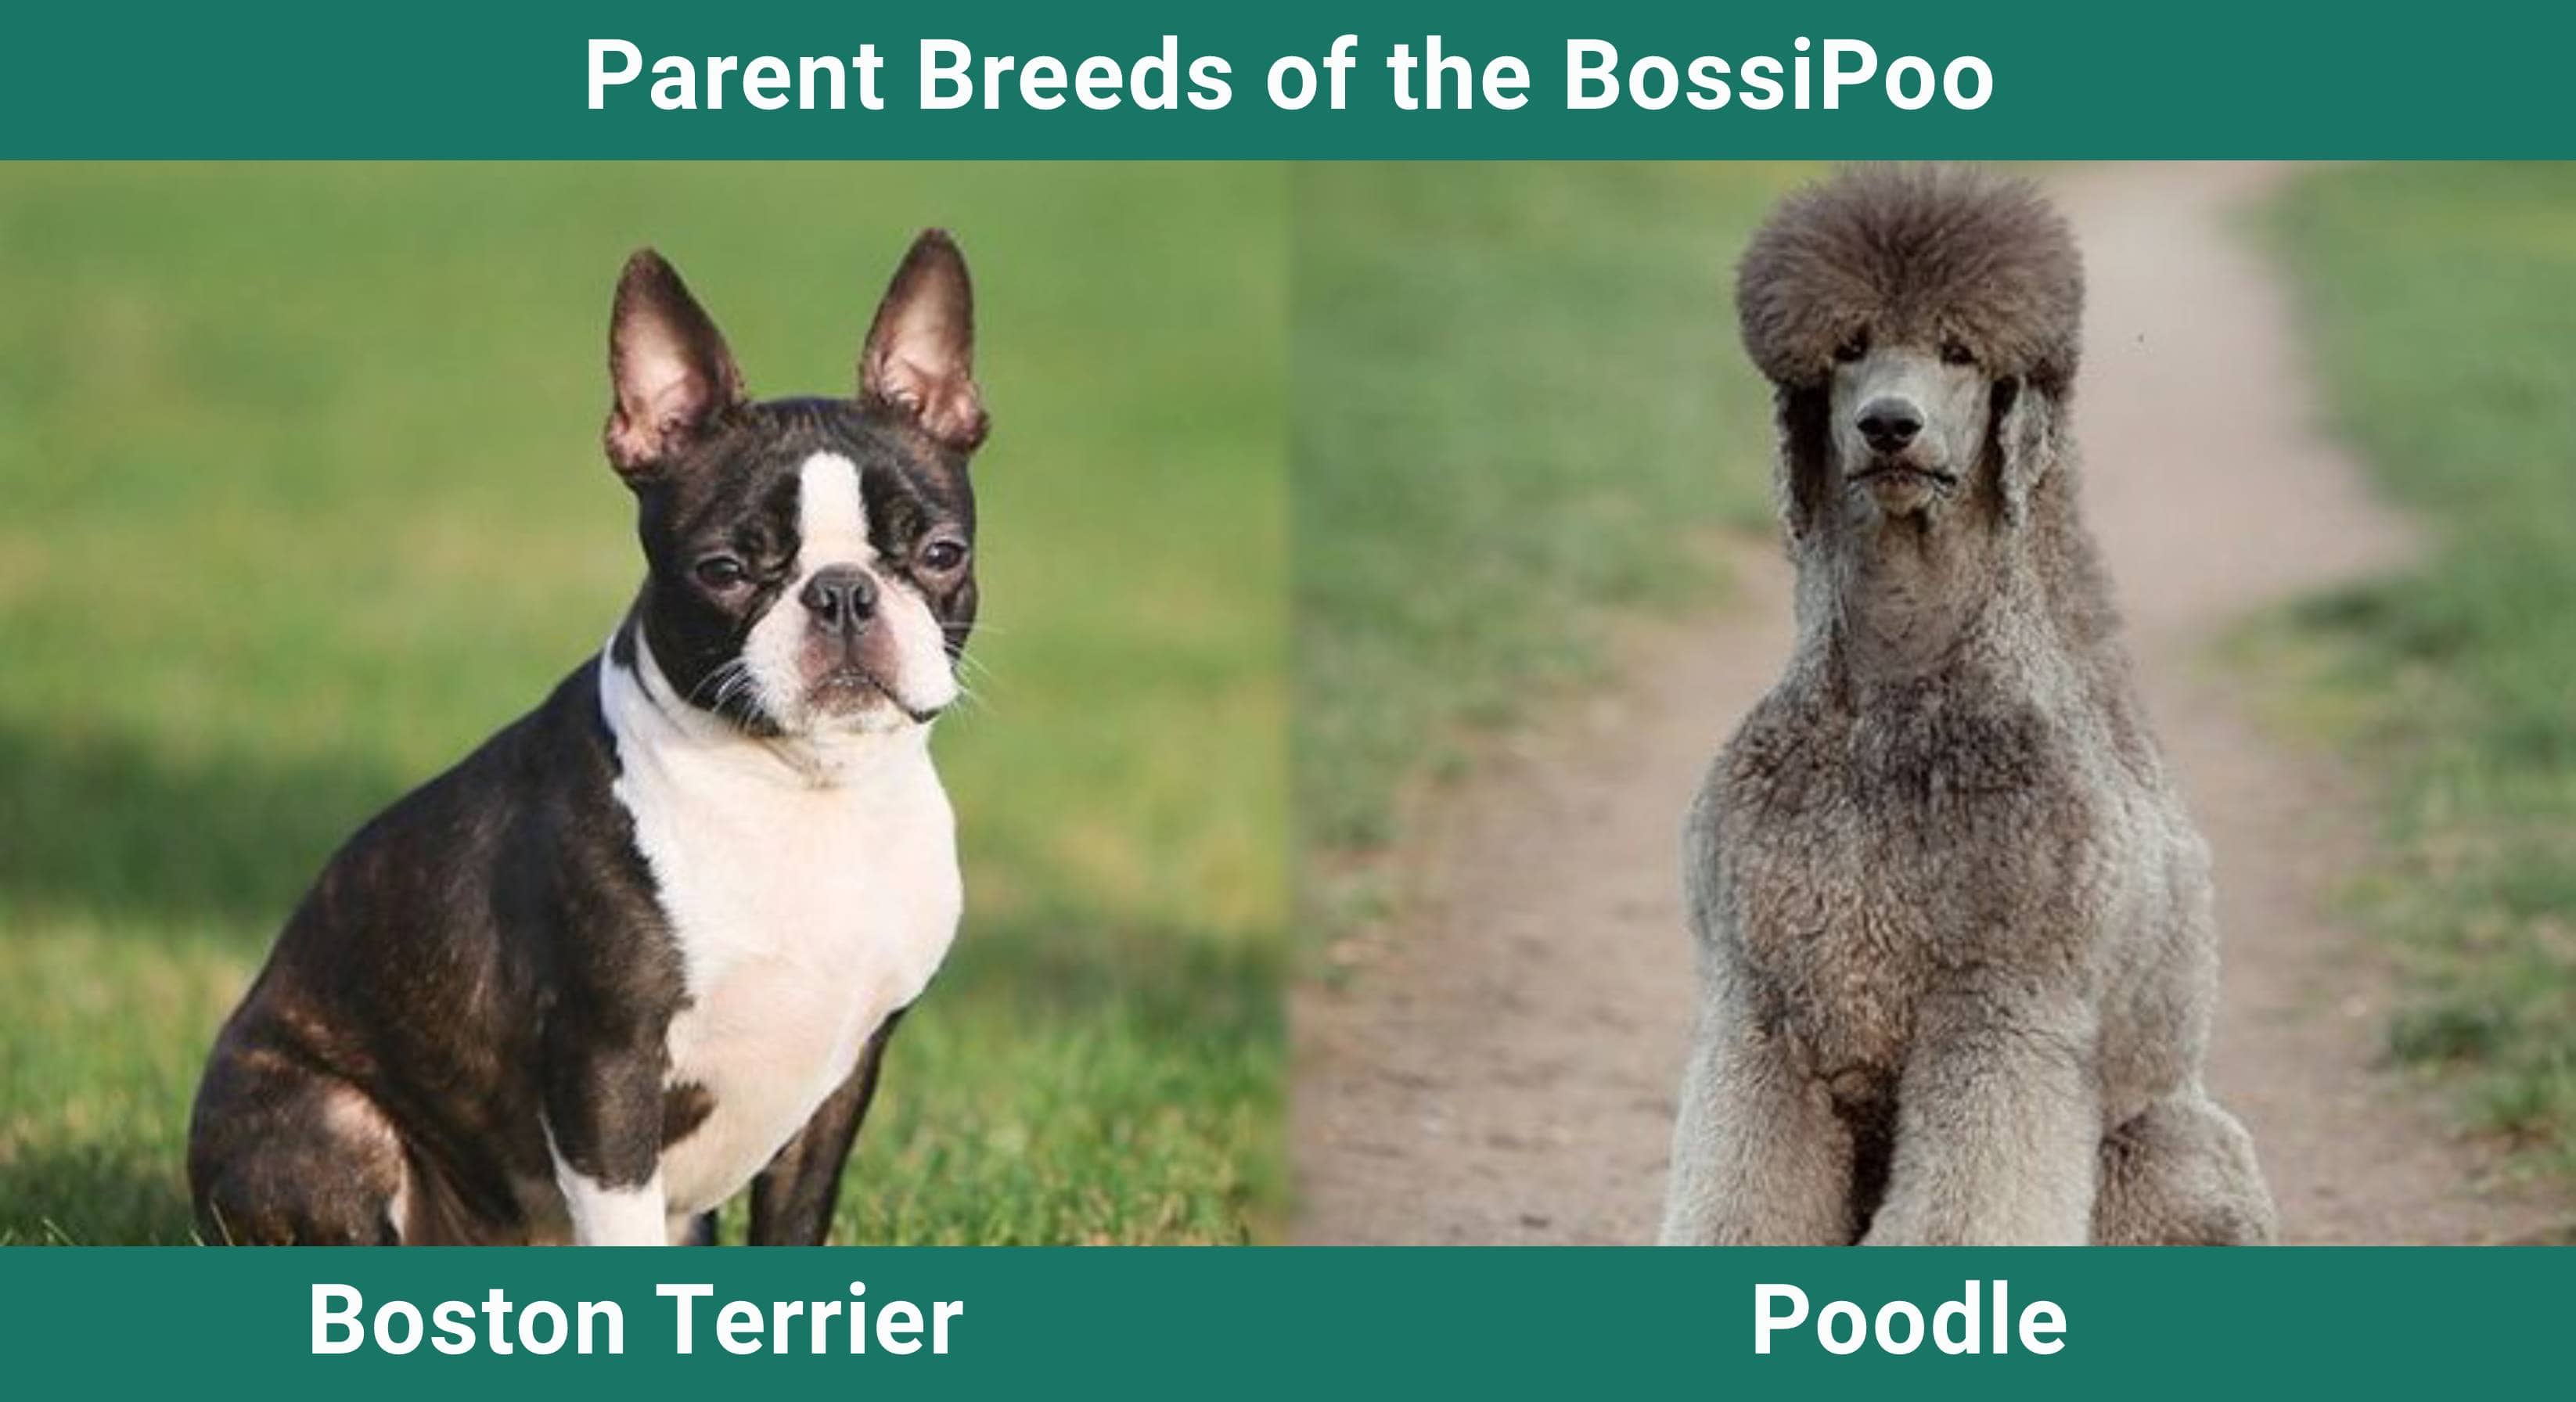 Poodle and Boston Terrier